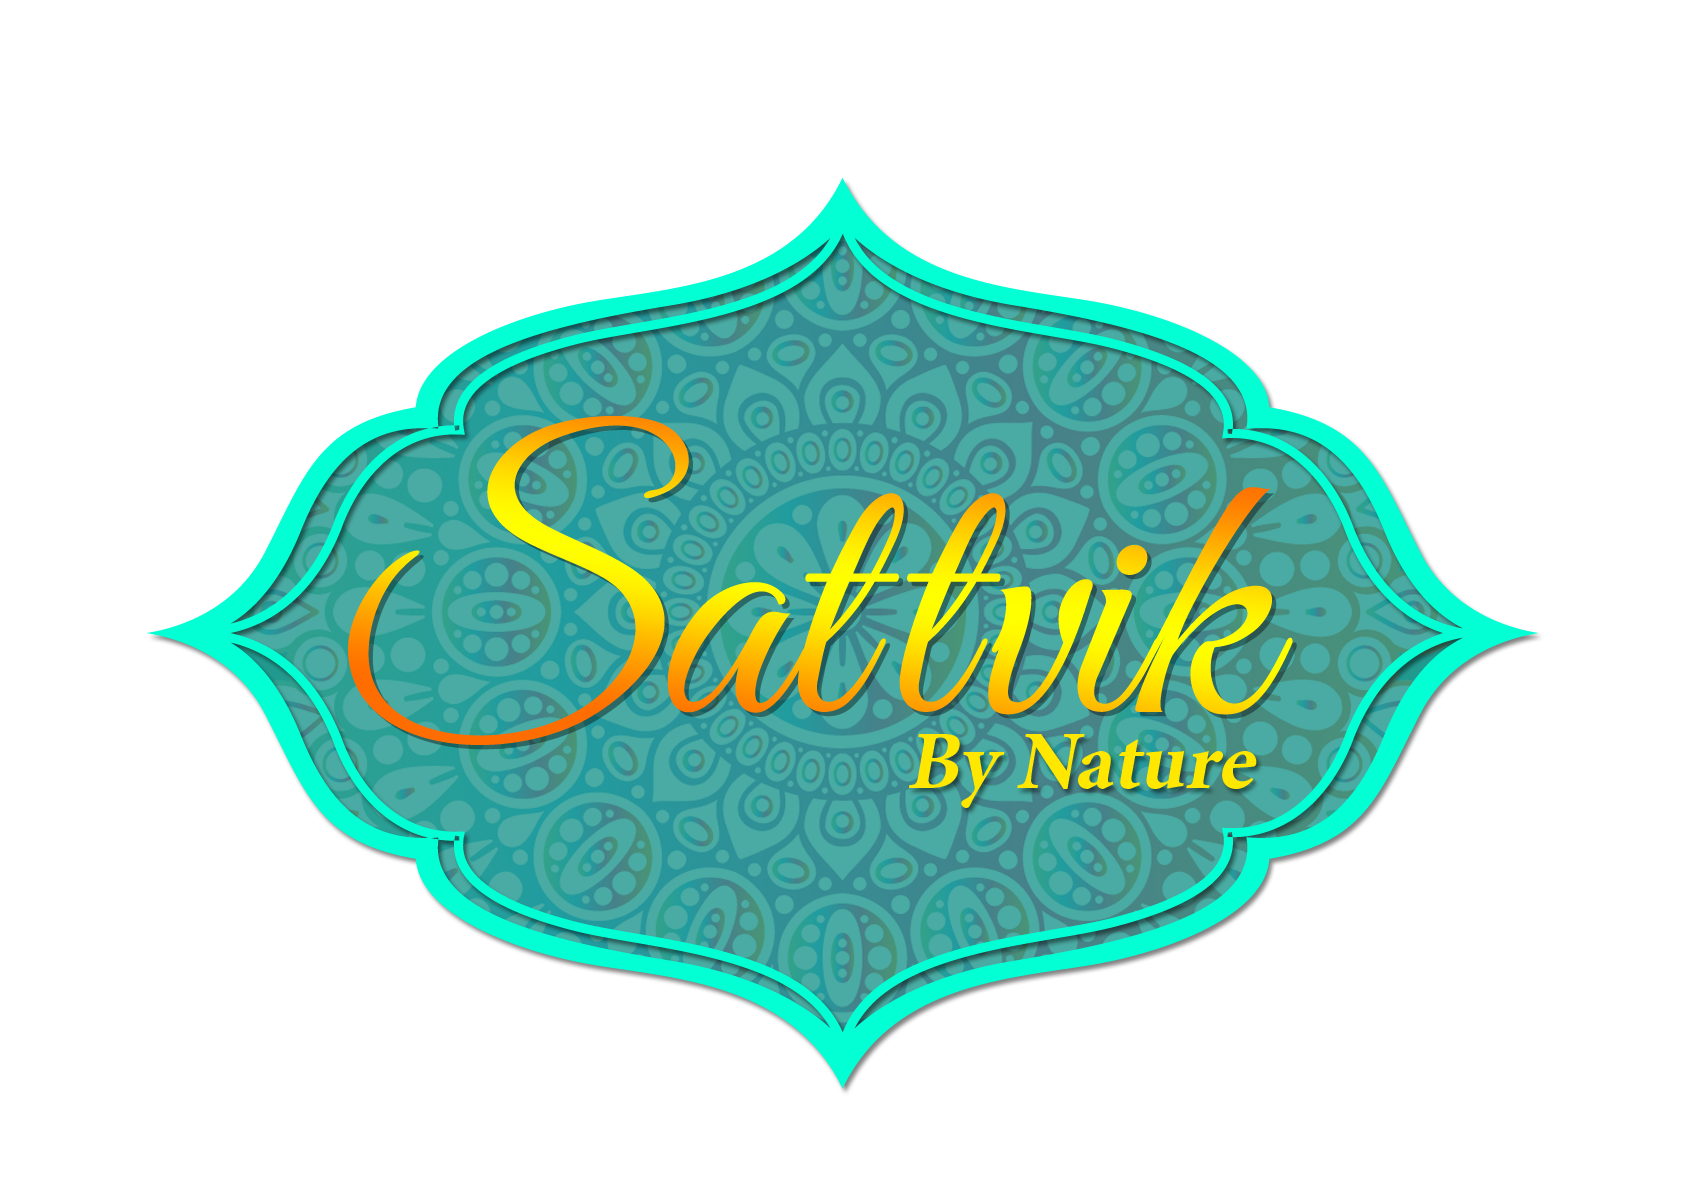 Sattvik by Nature